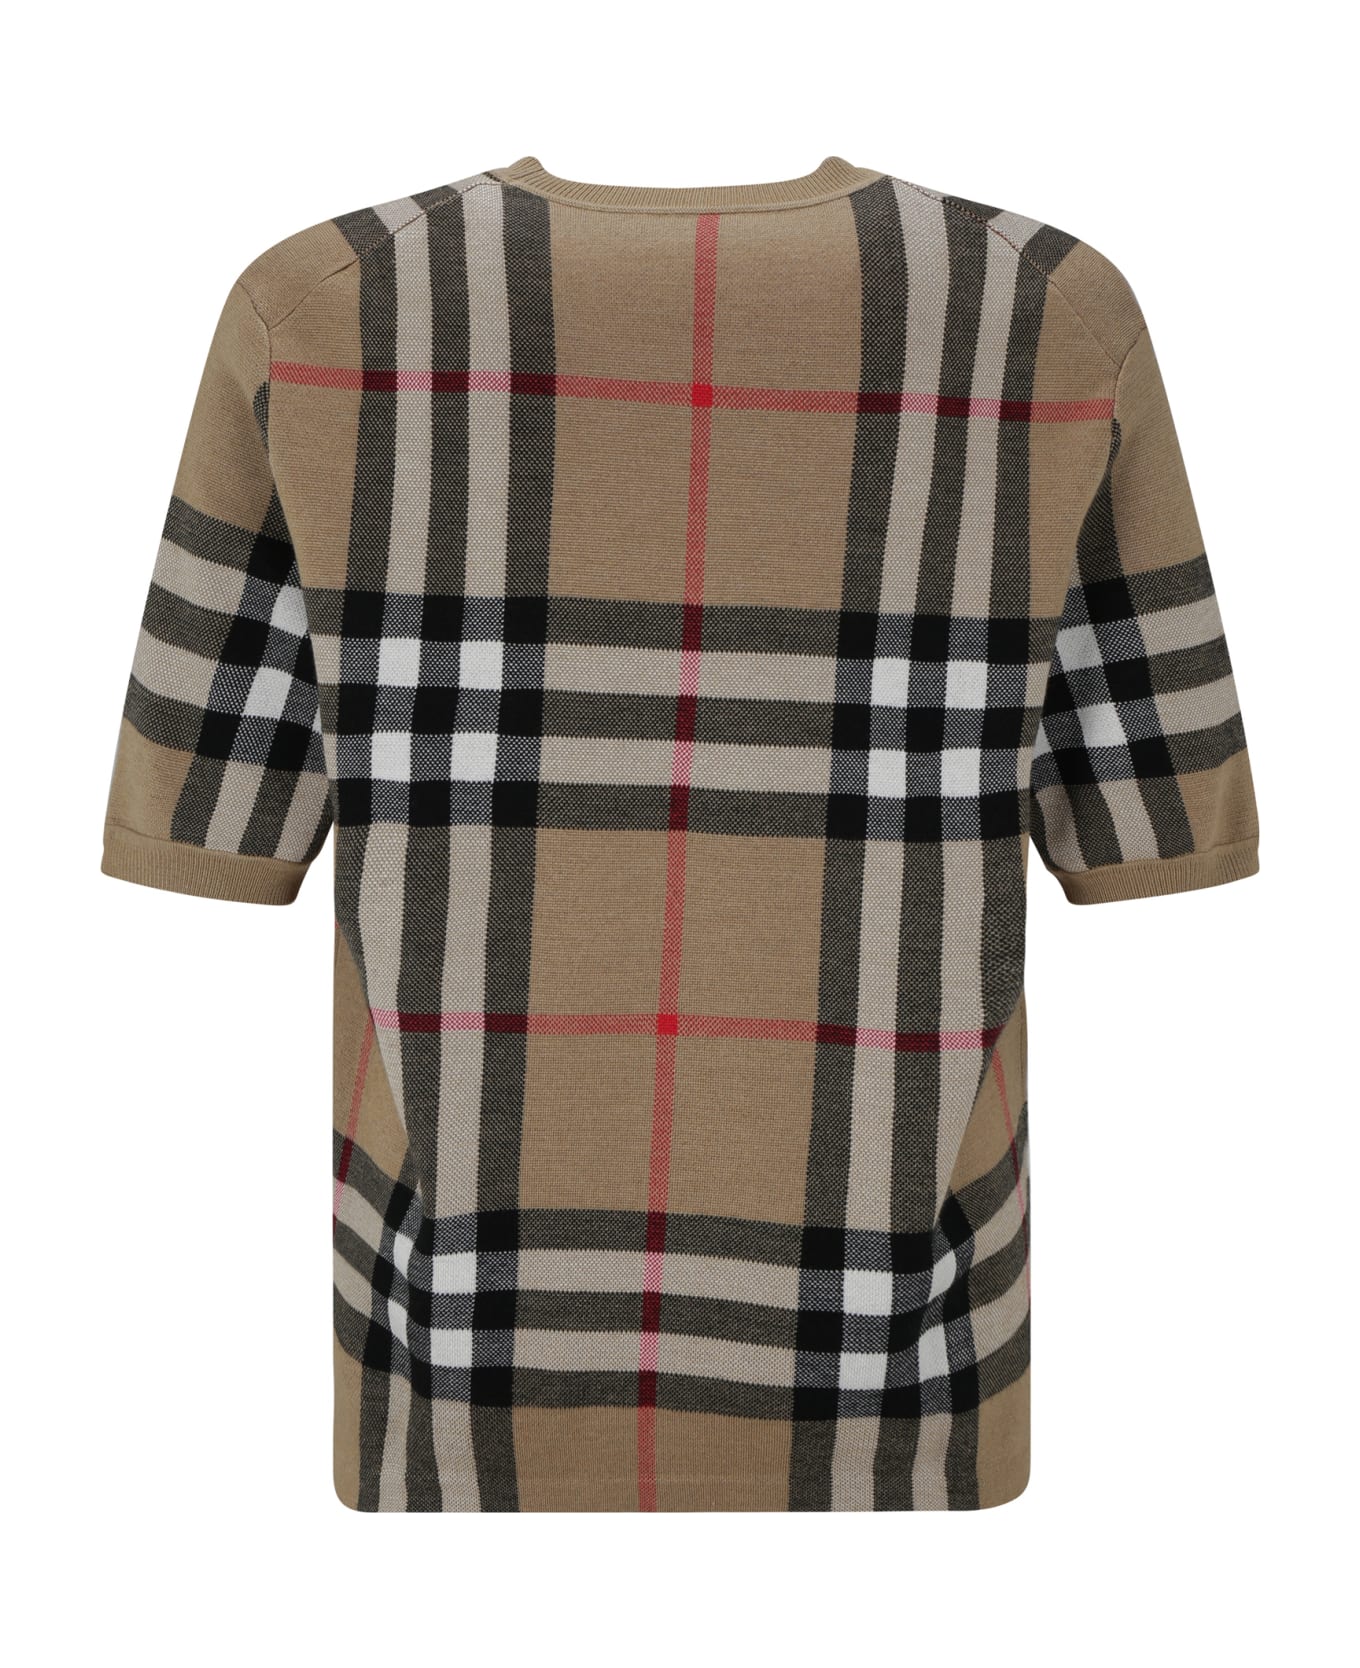 Burberry Wool T-shirt With Vintage Check Print - Beige シャツ